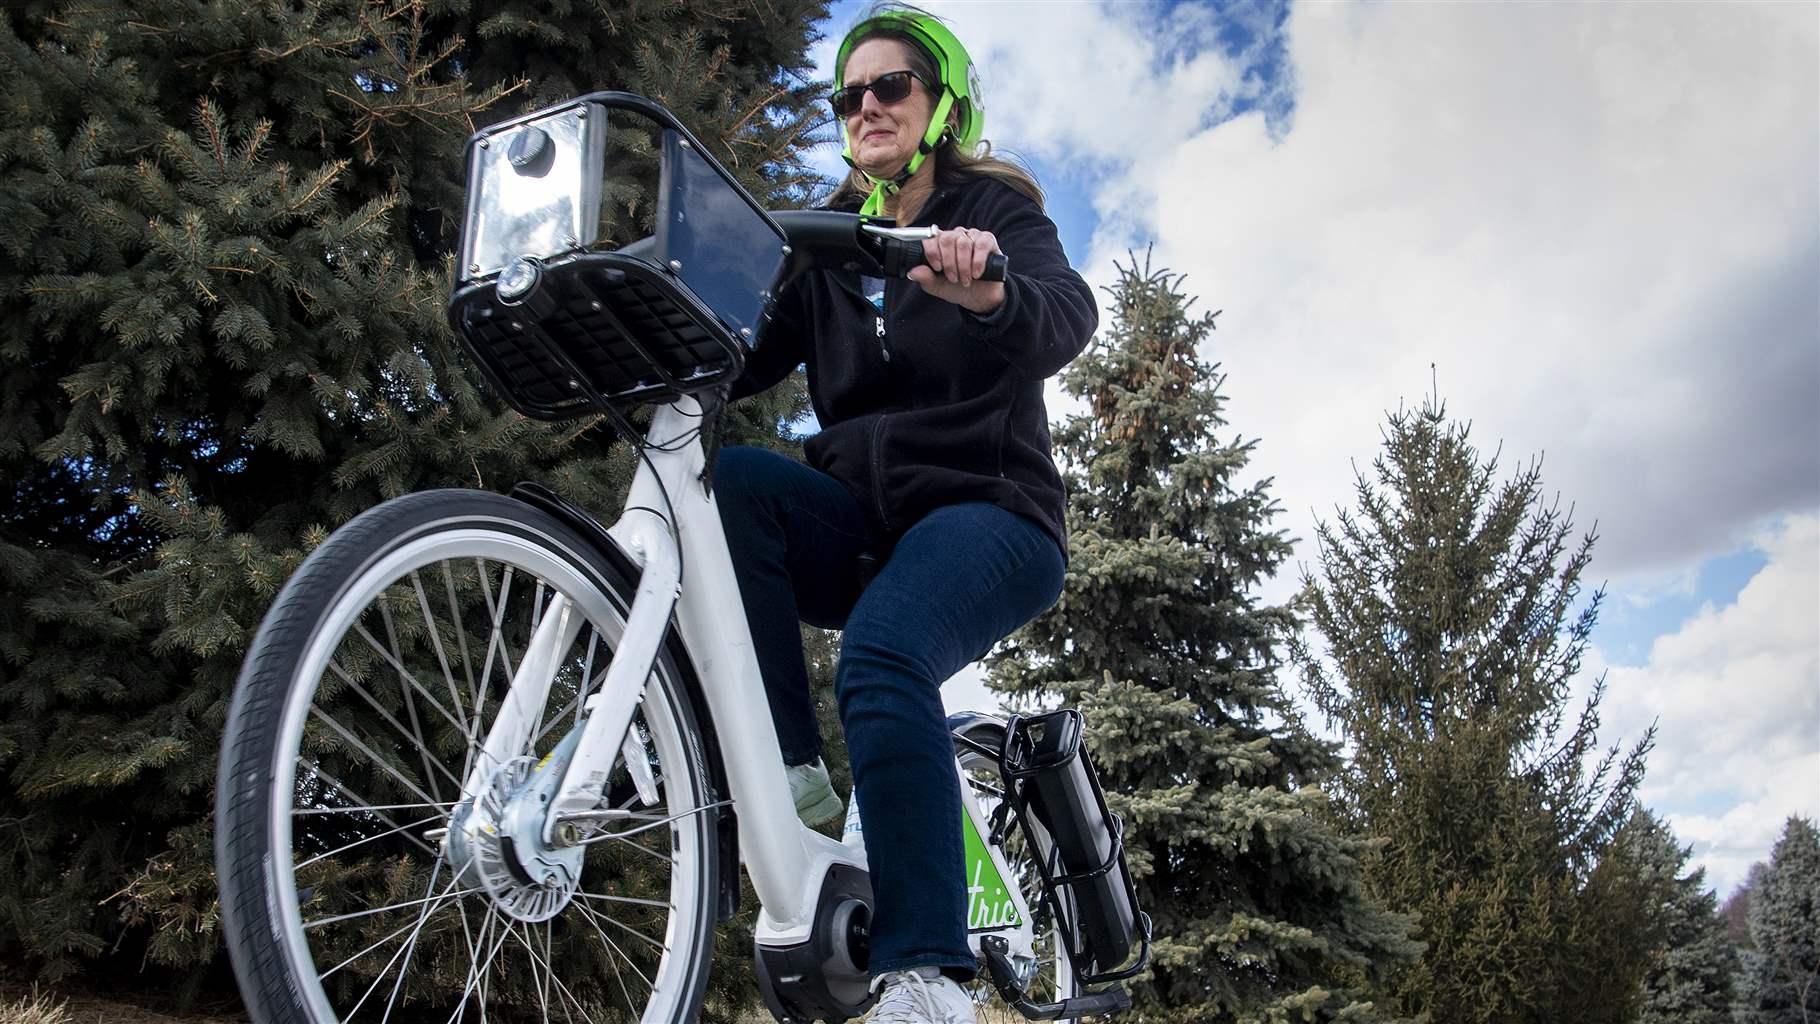 Pam Wisner of Valparaiso tries out one of five e-bikes available for a ride around Woods Park